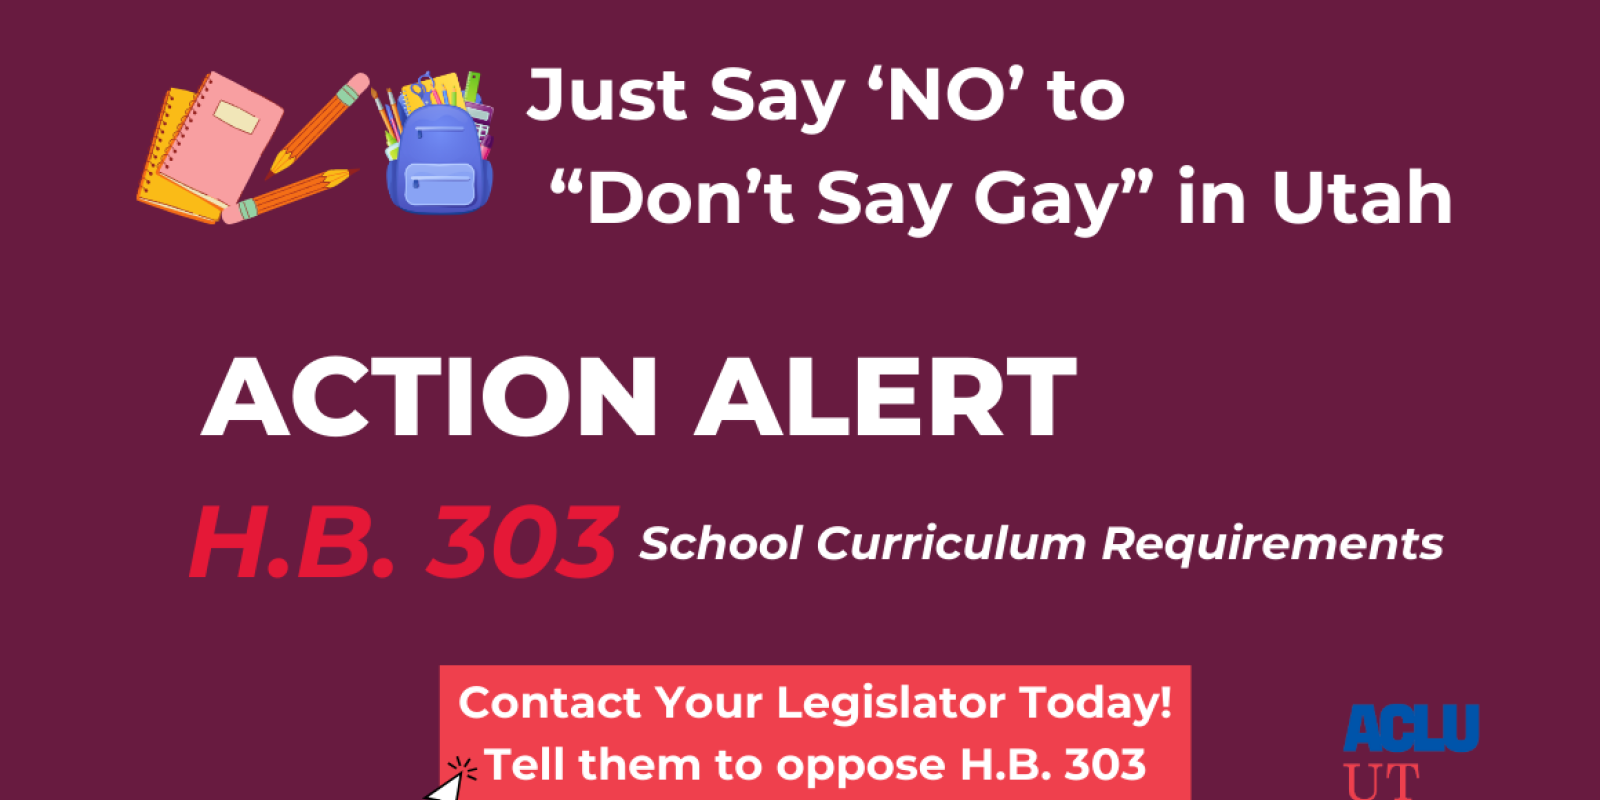 Just say 'NO" to "Don't Say Gay" in Utah action alert graphic for the aclu of utah.